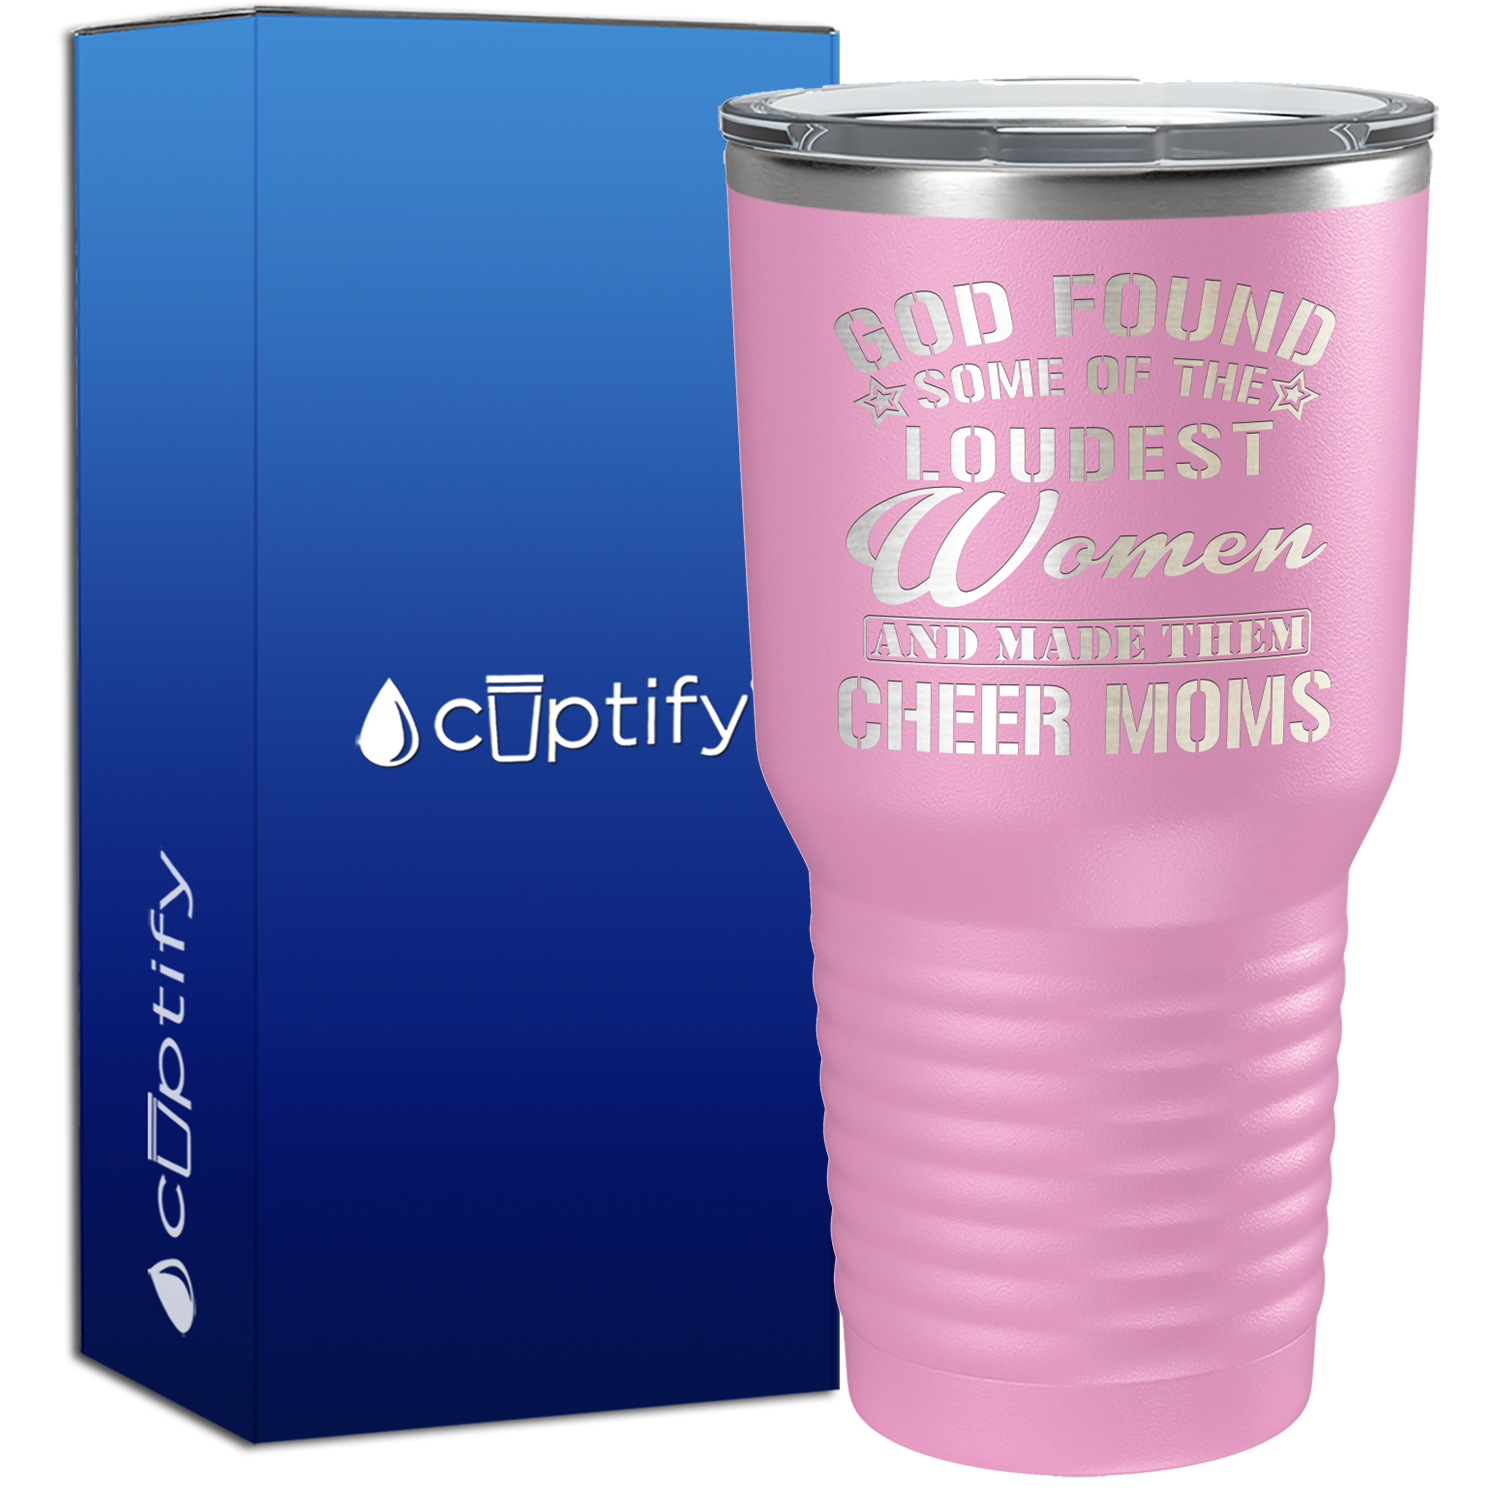 God Found Some of the Loudest Women 30oz Cheer Tumbler